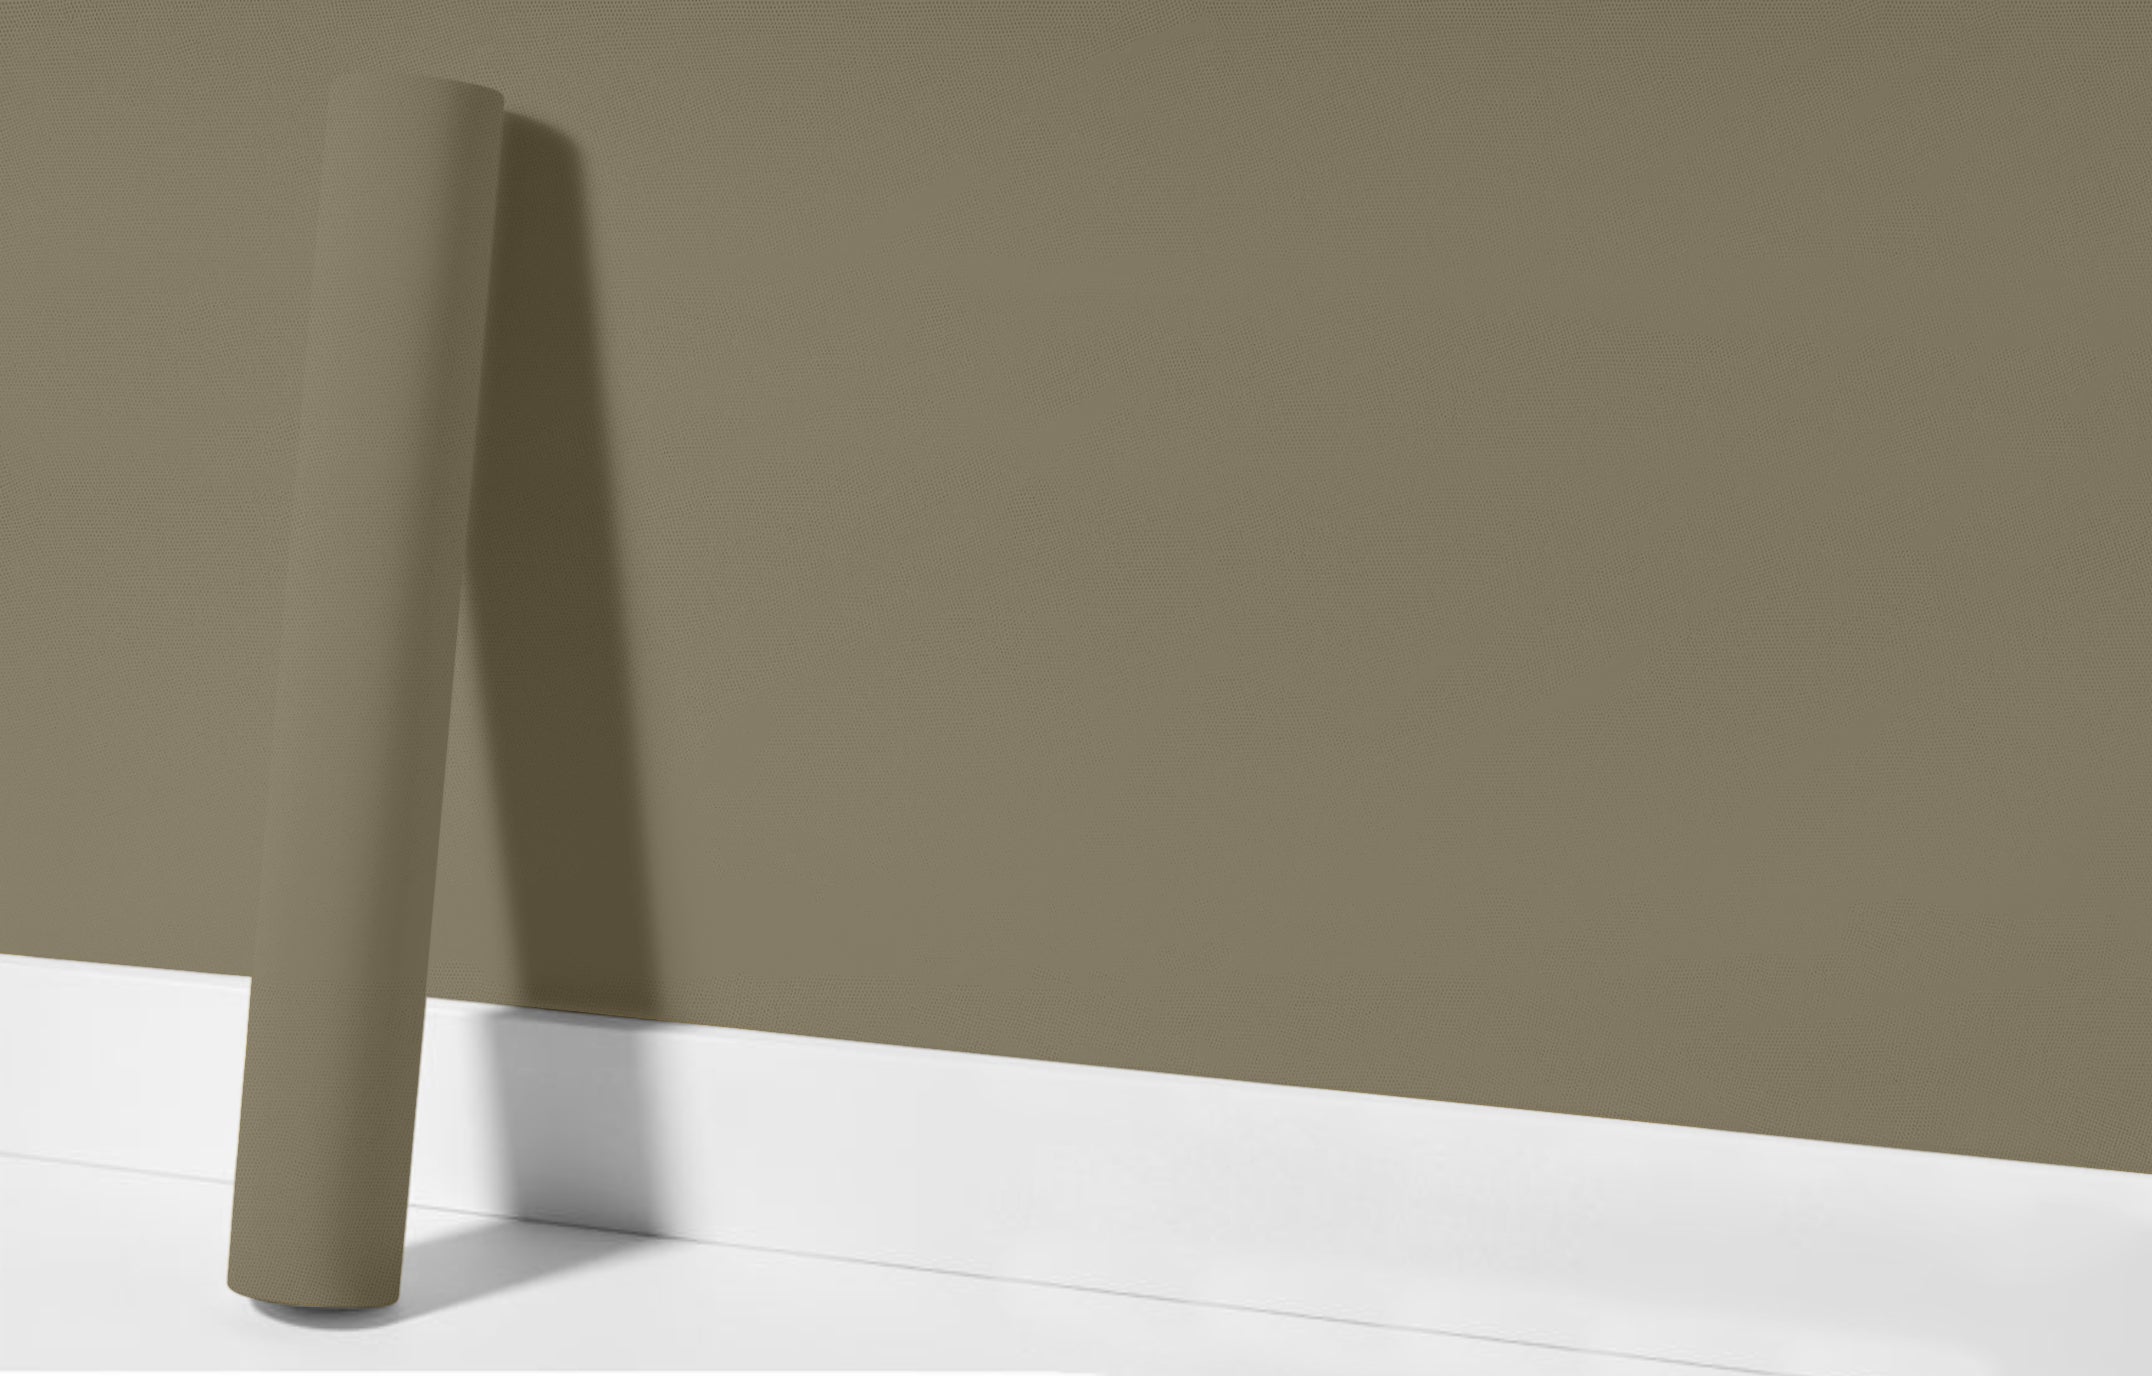 Peel & Stick Removable Re-usable Paint - Color RAL 7002 Olive Grey - offRAL™ - RALRAW LLC, USA